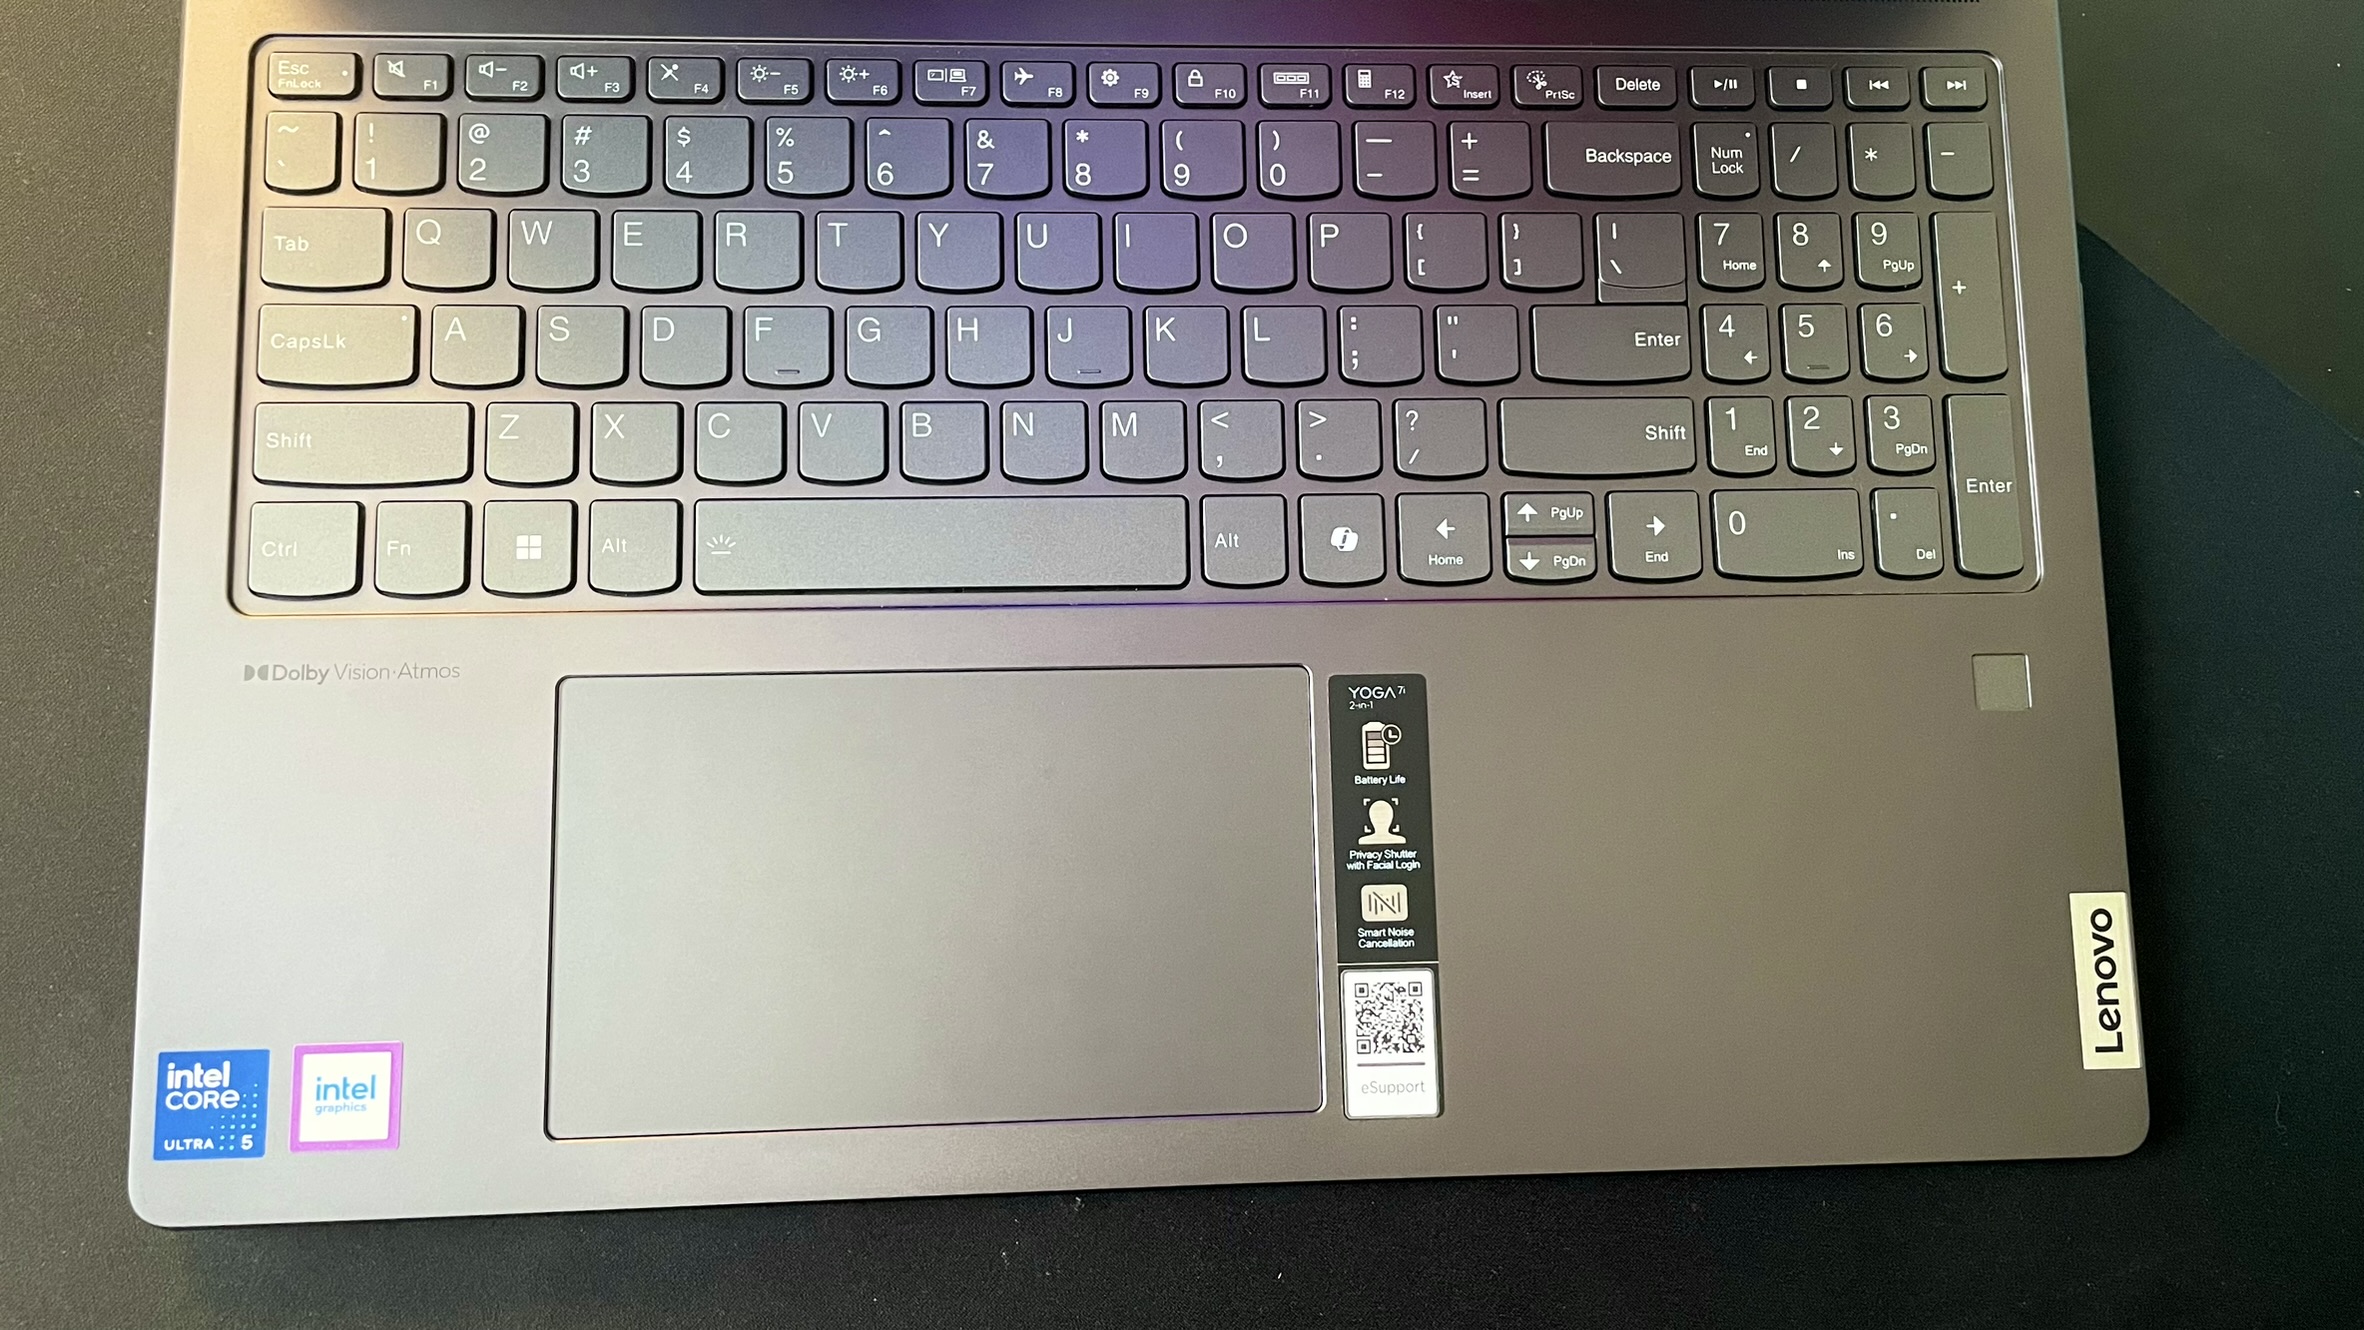 Lenovo Yoga 7i keyboard and touchpad with fingerprint reader